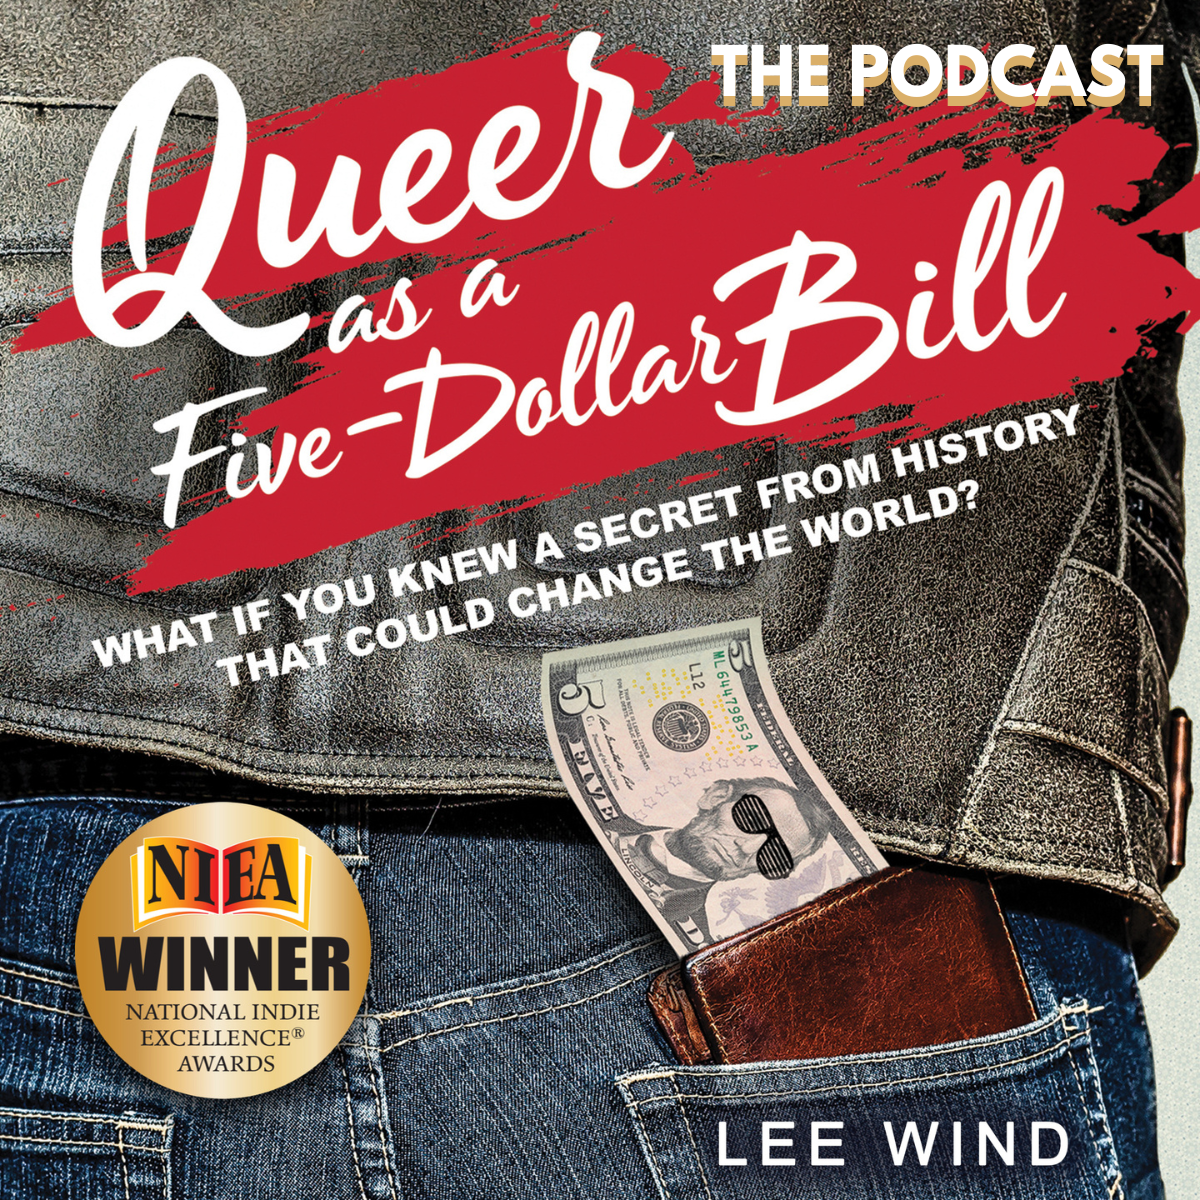 The logo for QUEER AS A FIVE-DOLLAR BILL: THE PODCAST